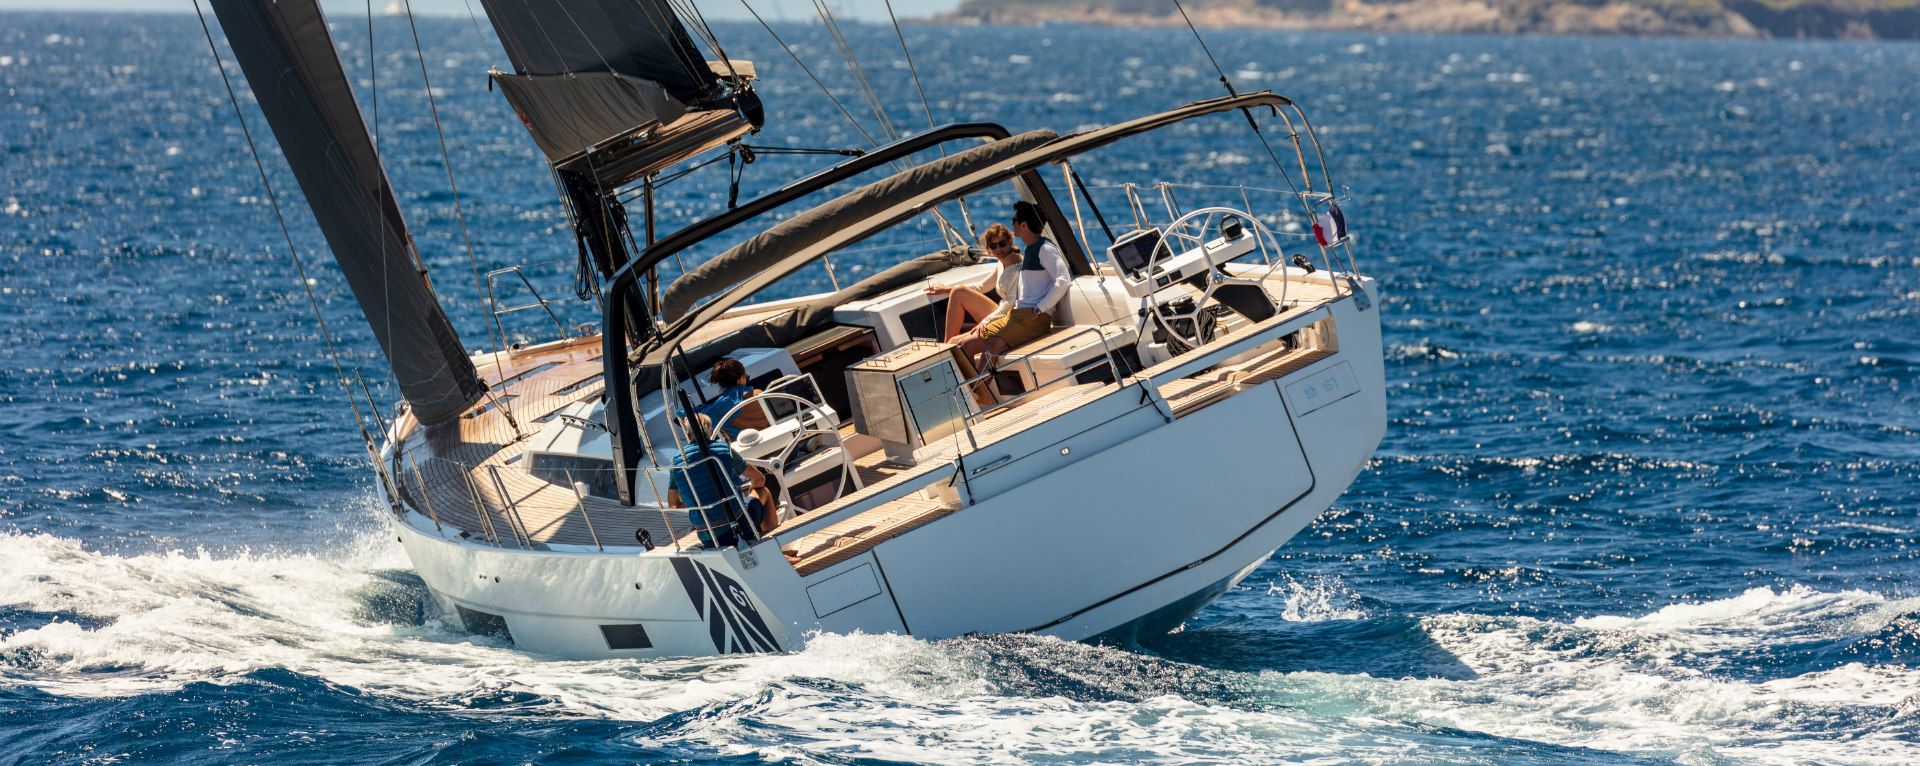 Dufour's Flagship Yacht - Incomparable sailing